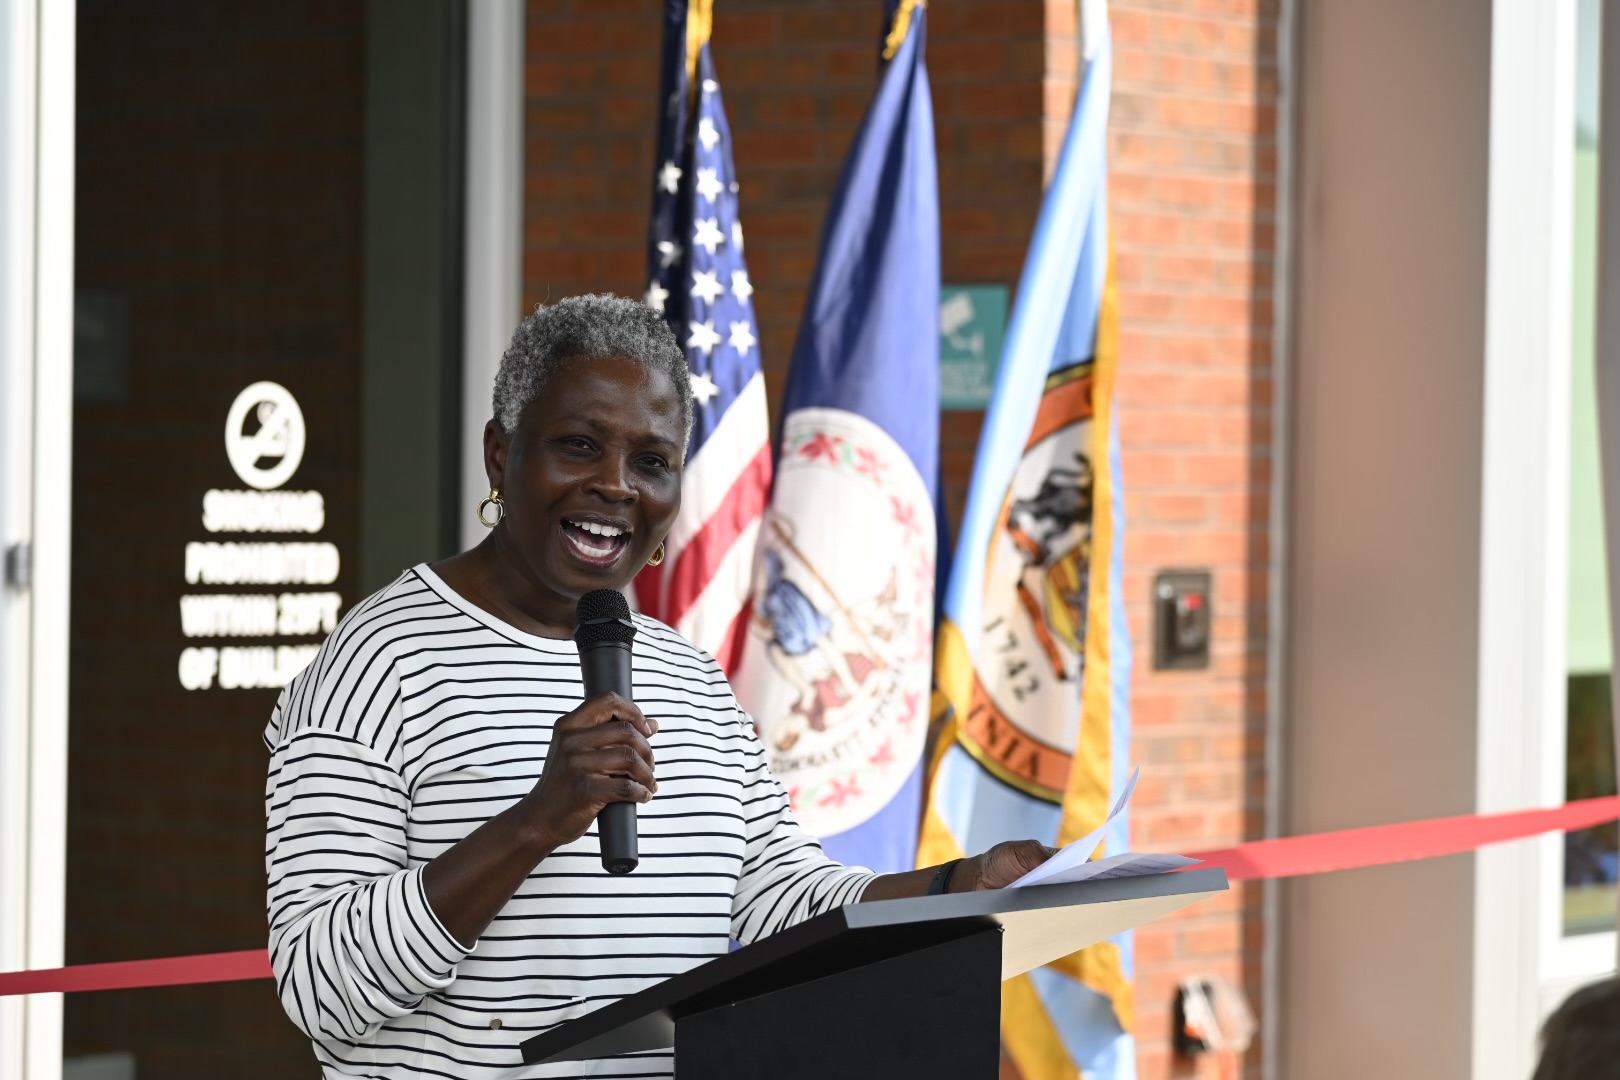 Dr. Gloria Addo-Ayensu speaking at the Sully Community Center grand opening